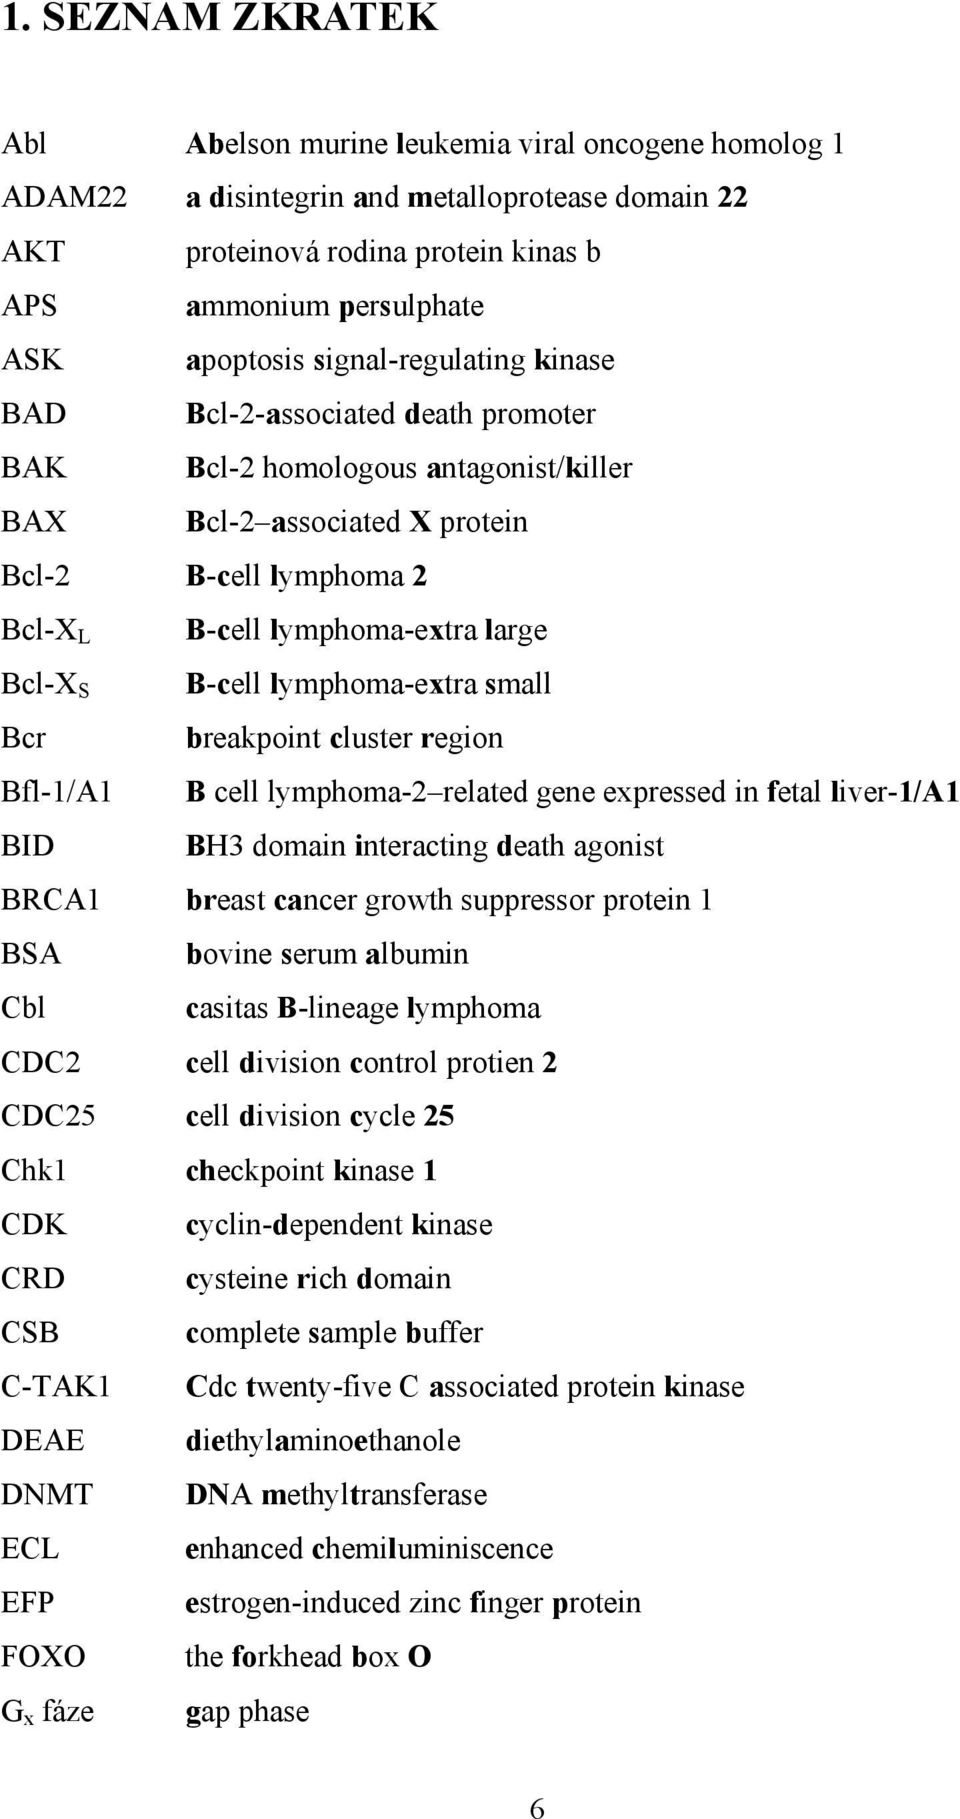 B-cell lymphoma-extra small Bcr breakpoint cluster region Bfl-1/A1 B cell lymphoma-2 related gene expressed in fetal liver-1/a1 BID BH3 domain interacting death agonist BRCA1 breast cancer growth